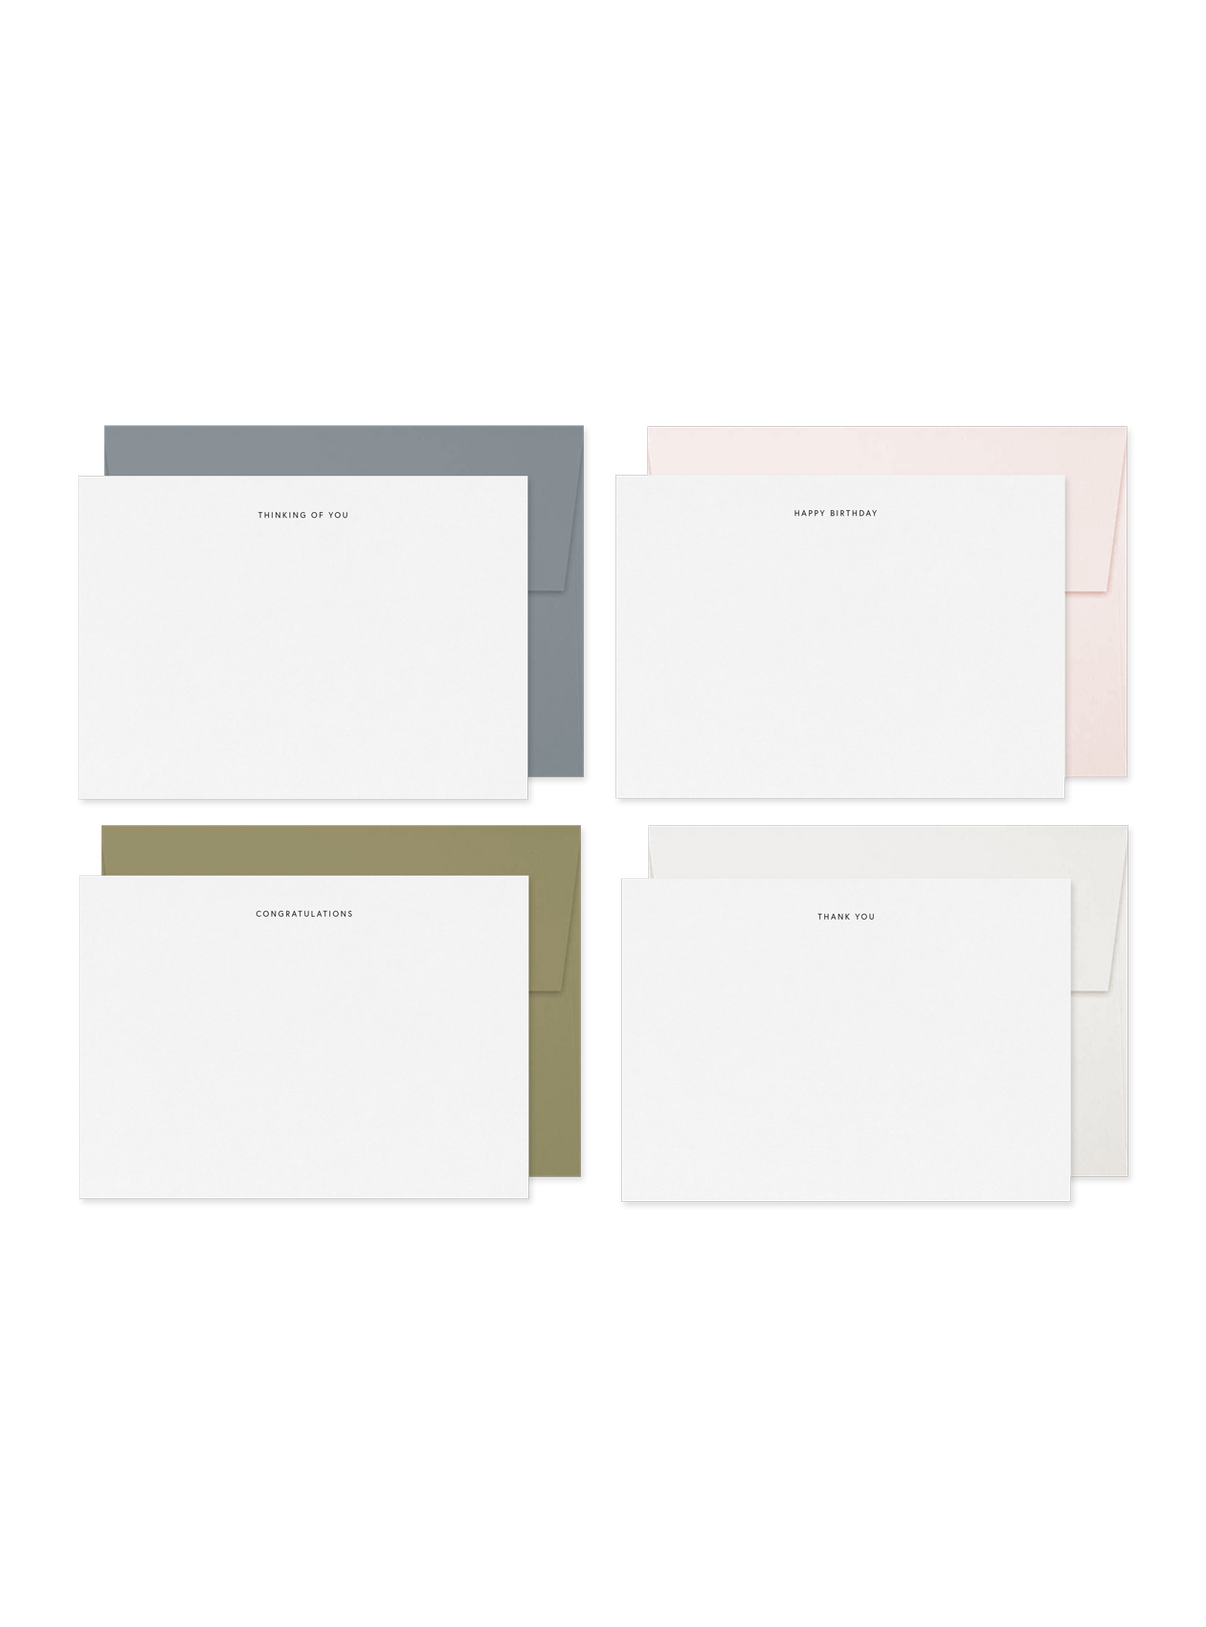 Appointed Desktop Greetings and envelopes, including: Thinking Of You, Happy Birthday, Congratulations, and Thank You